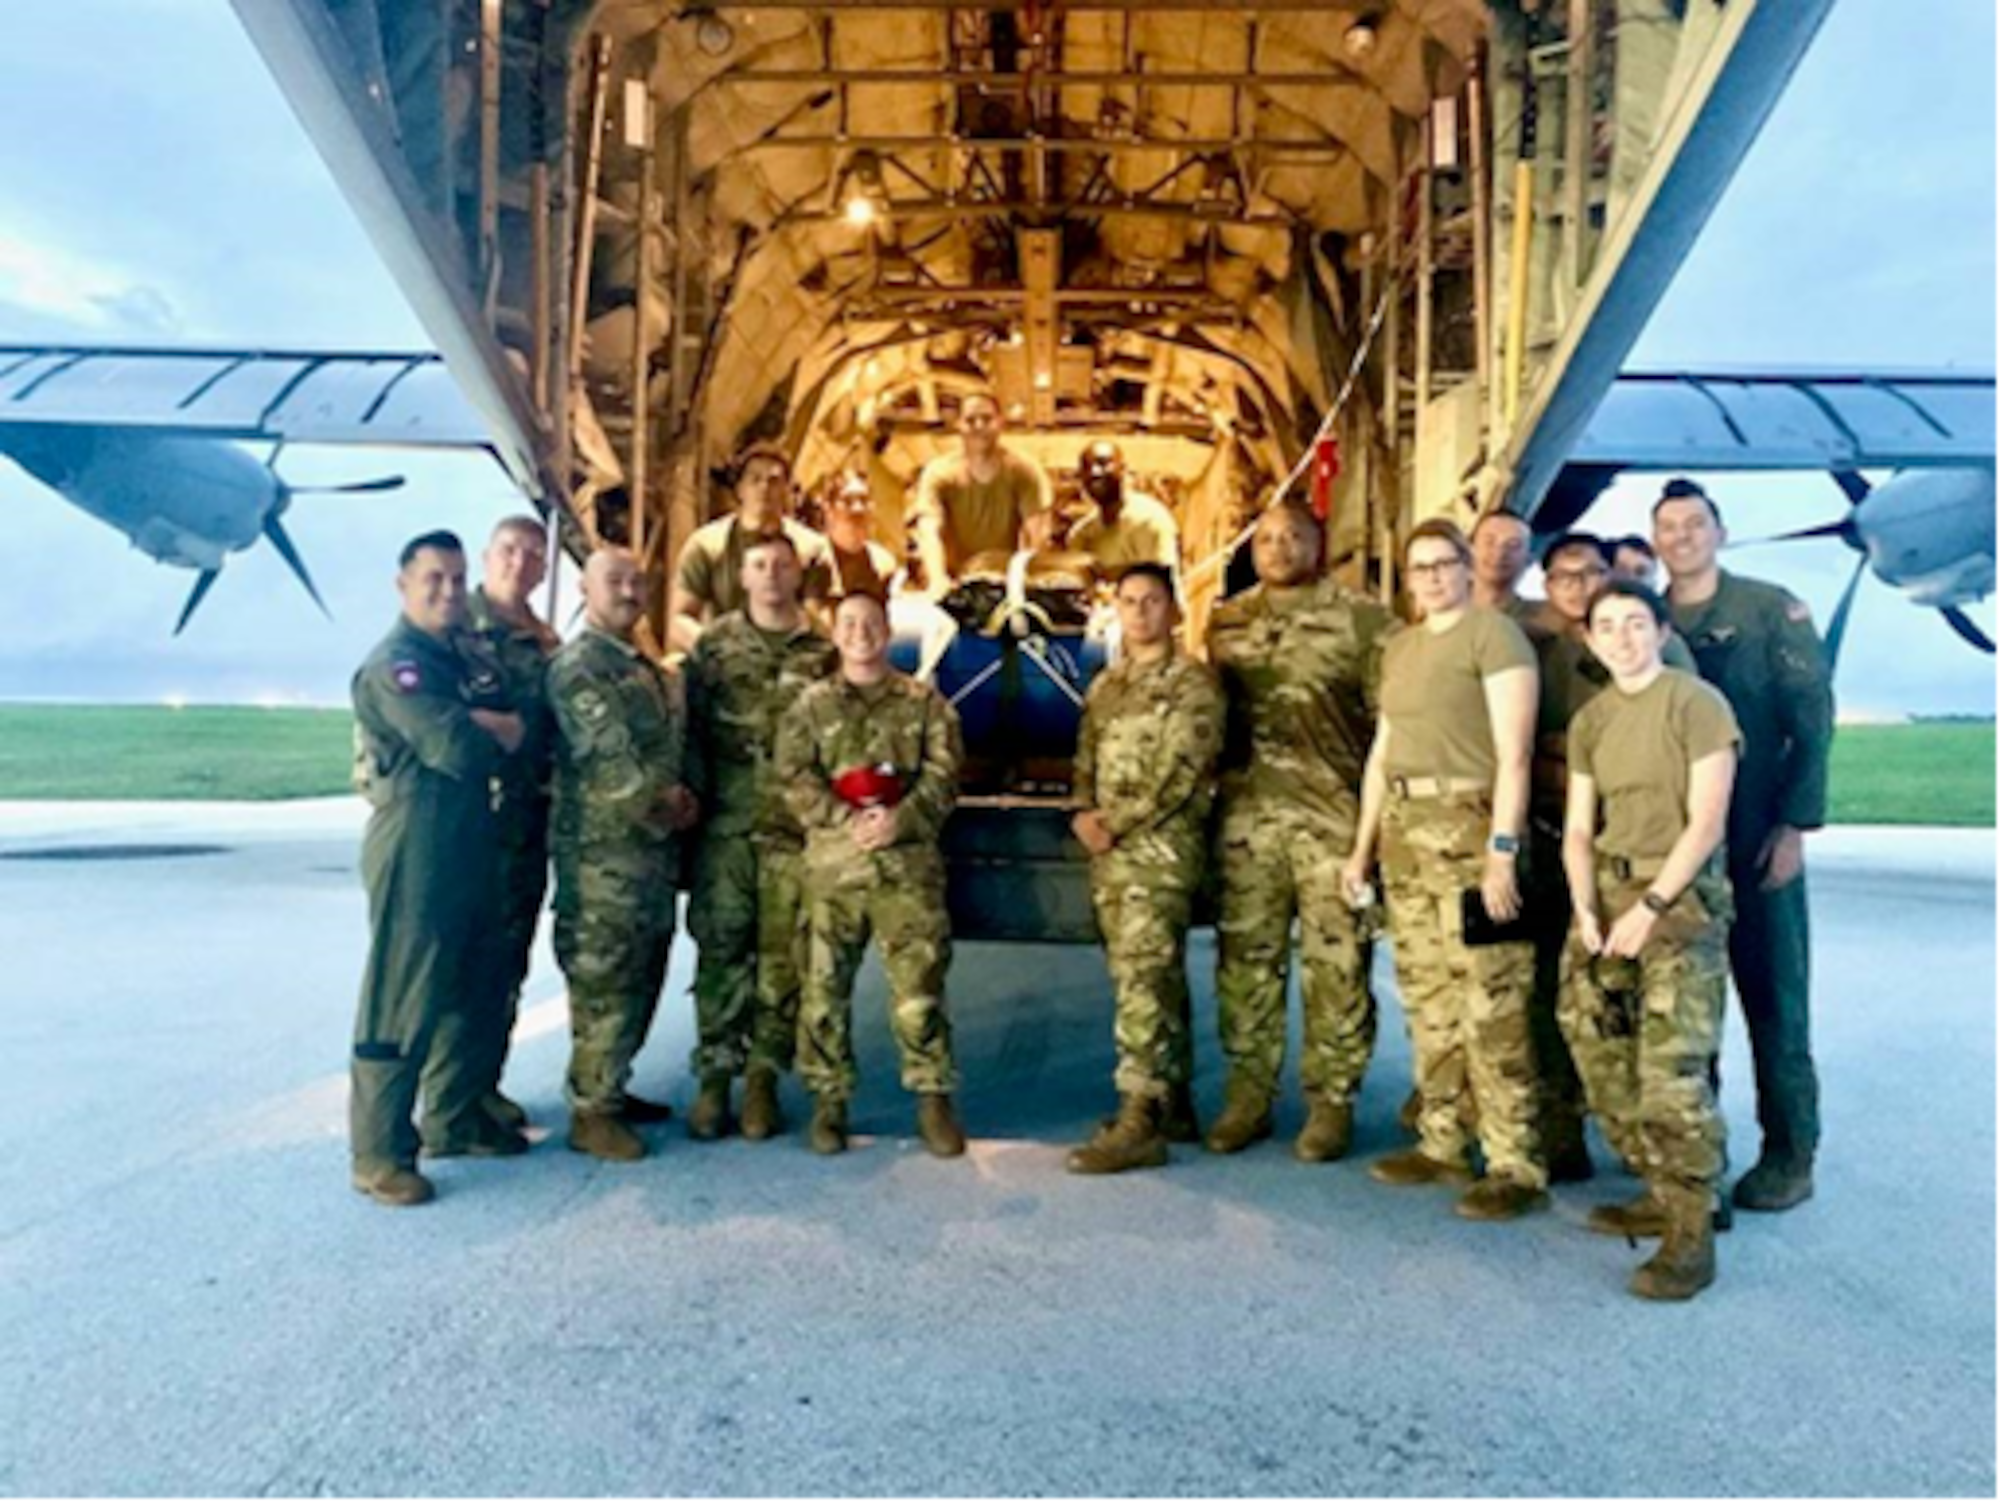 A team of U.S. Air Force Airmen pose for a group photo outside a U.S. Air Force C-130J Super Hercules, call sign “KANTO 92,” assigned to 36th Airlift Squadron deployed from Yokota Air Force Base, Japan, after completing a rescue mission at Andersen Air Force Base, Guam, July 25, 2021. Members of the U.S. Air Force, U.S. Navy, U.S. Coast Guard worked together to save a U.S. Army Soldier who sustained injuries while on an Army Watercraft System during Exercise Forager 21.